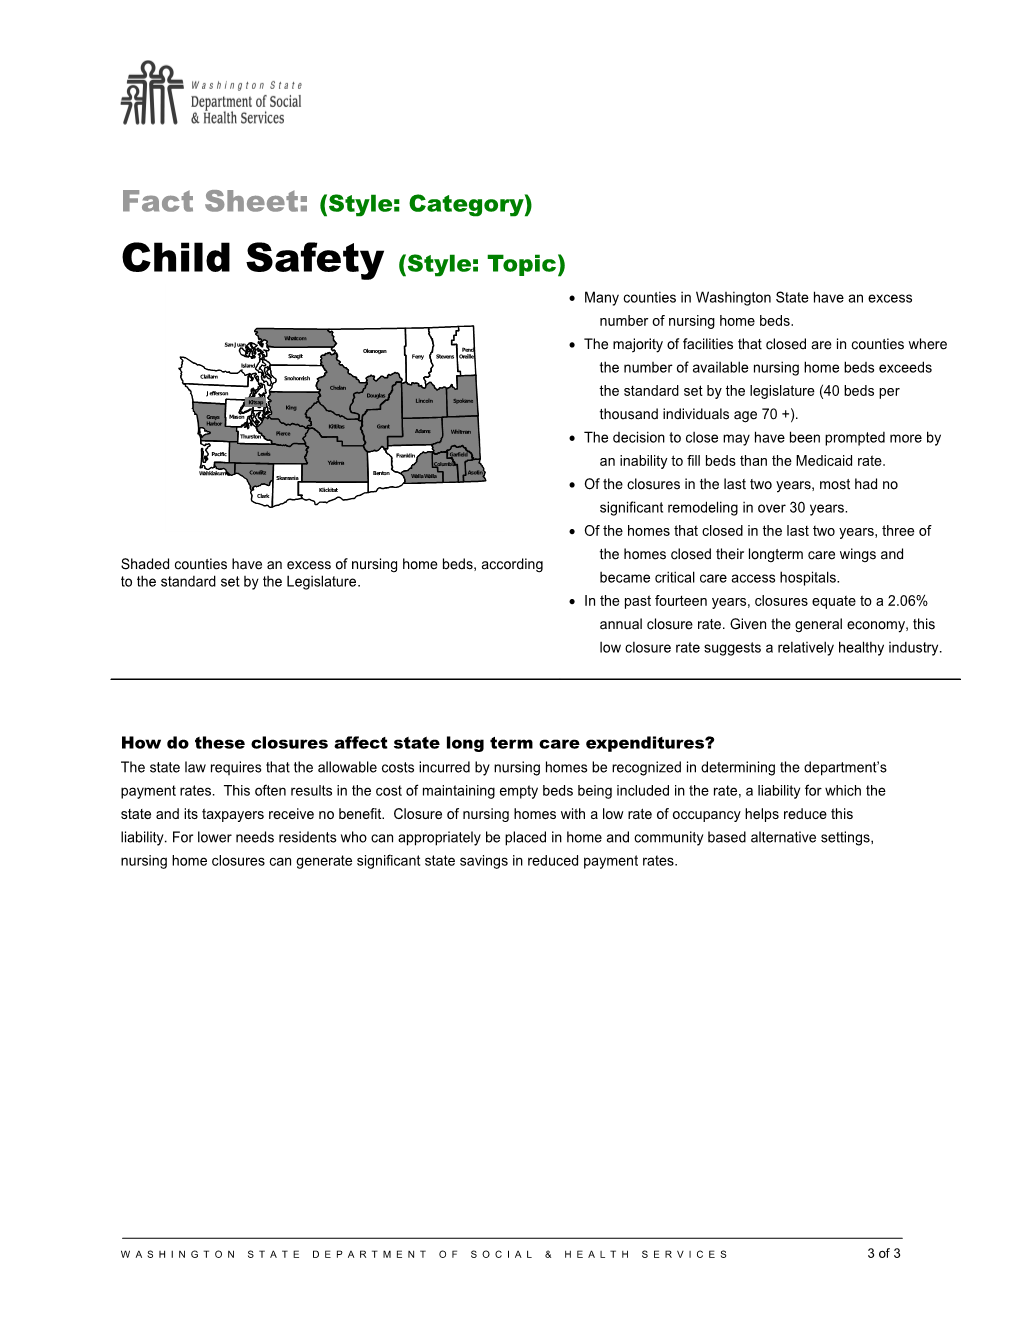 Child Safety (Style: Topic)